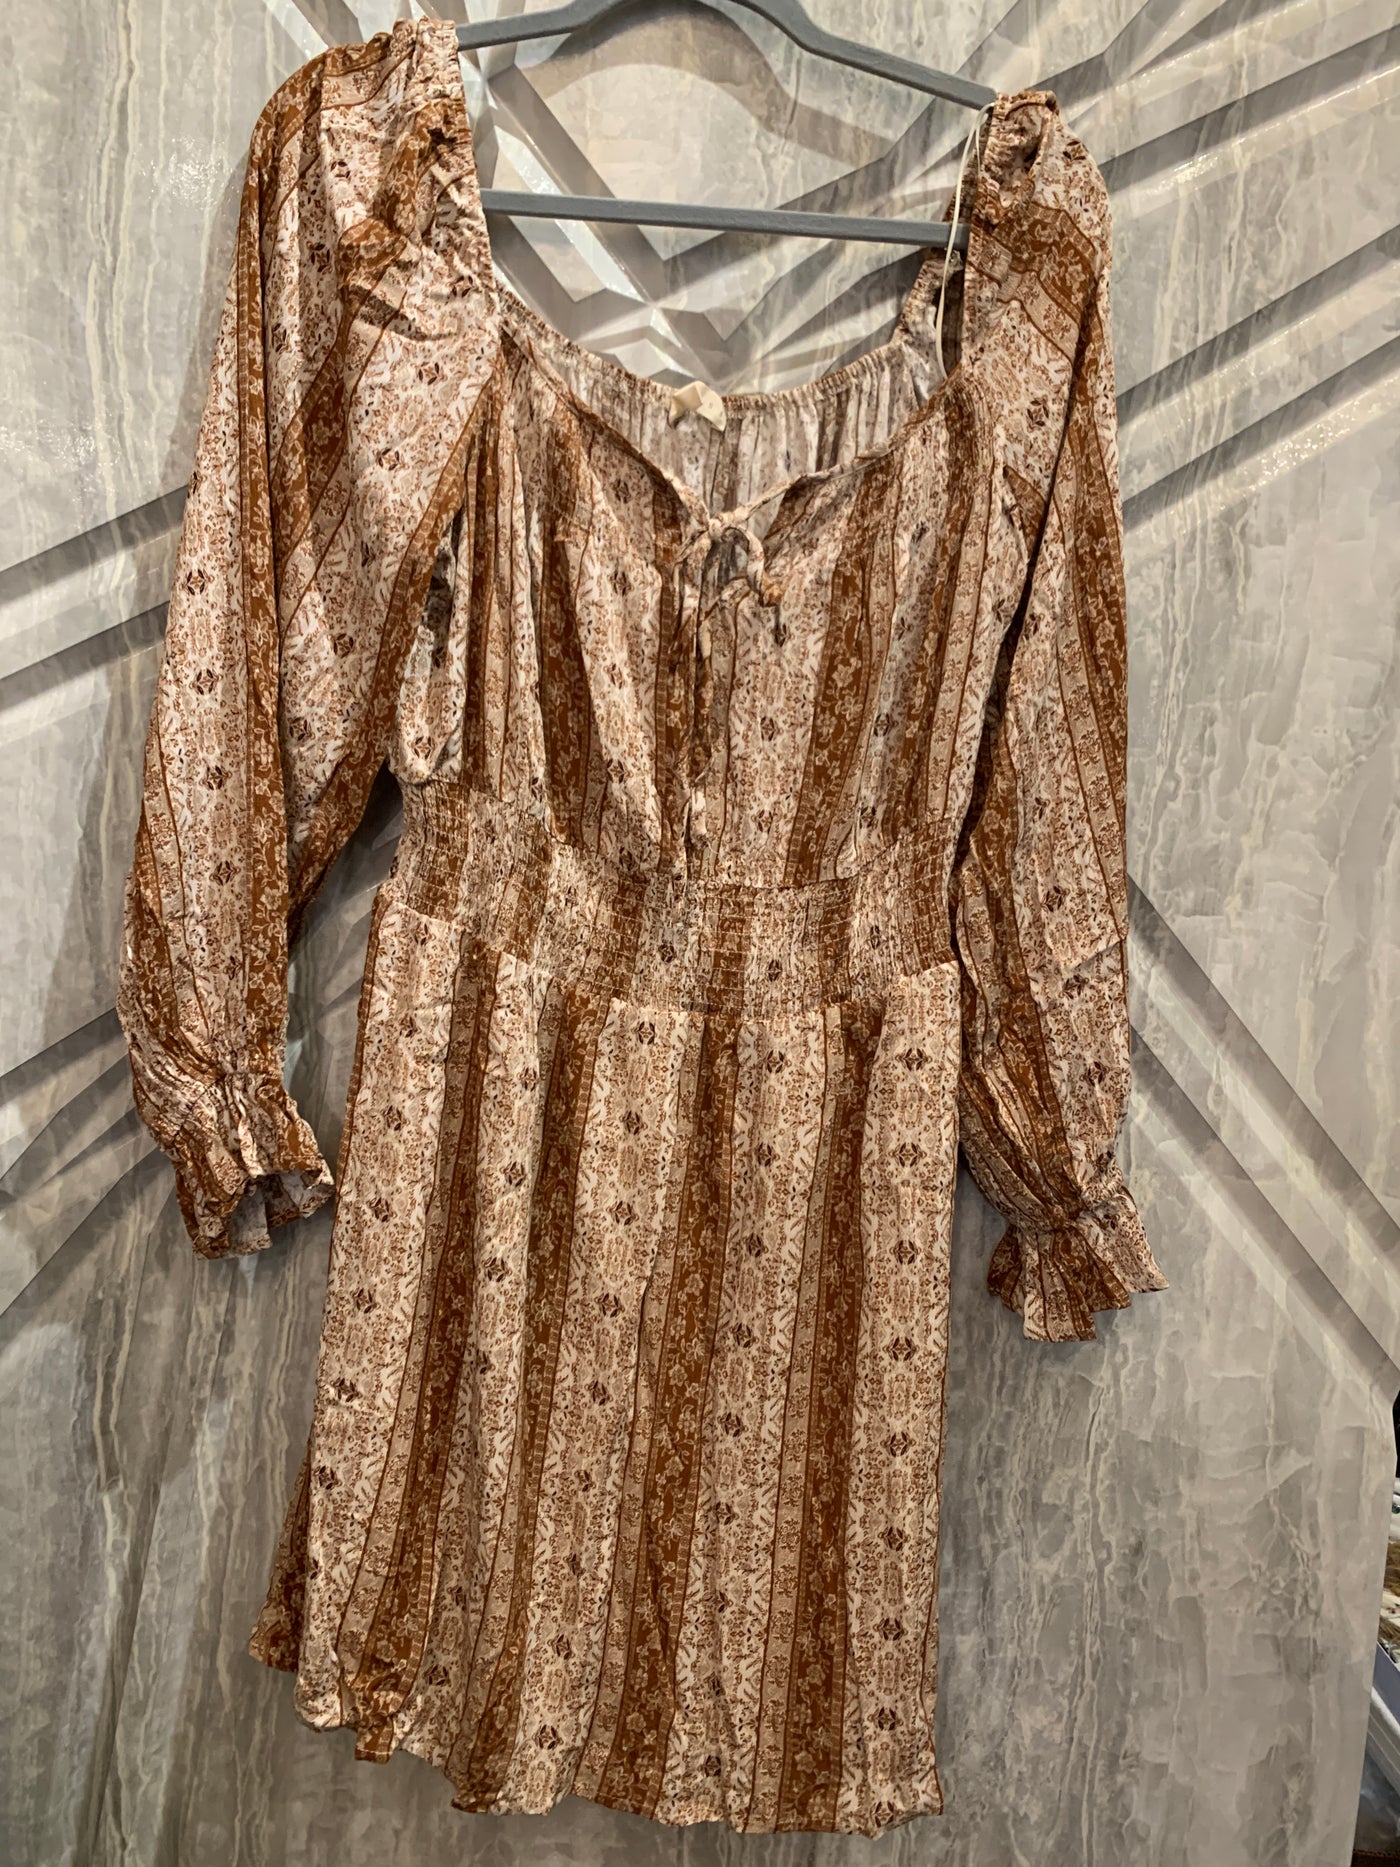 Long Sleeve Cream and Brown Floral Dress with Smocking